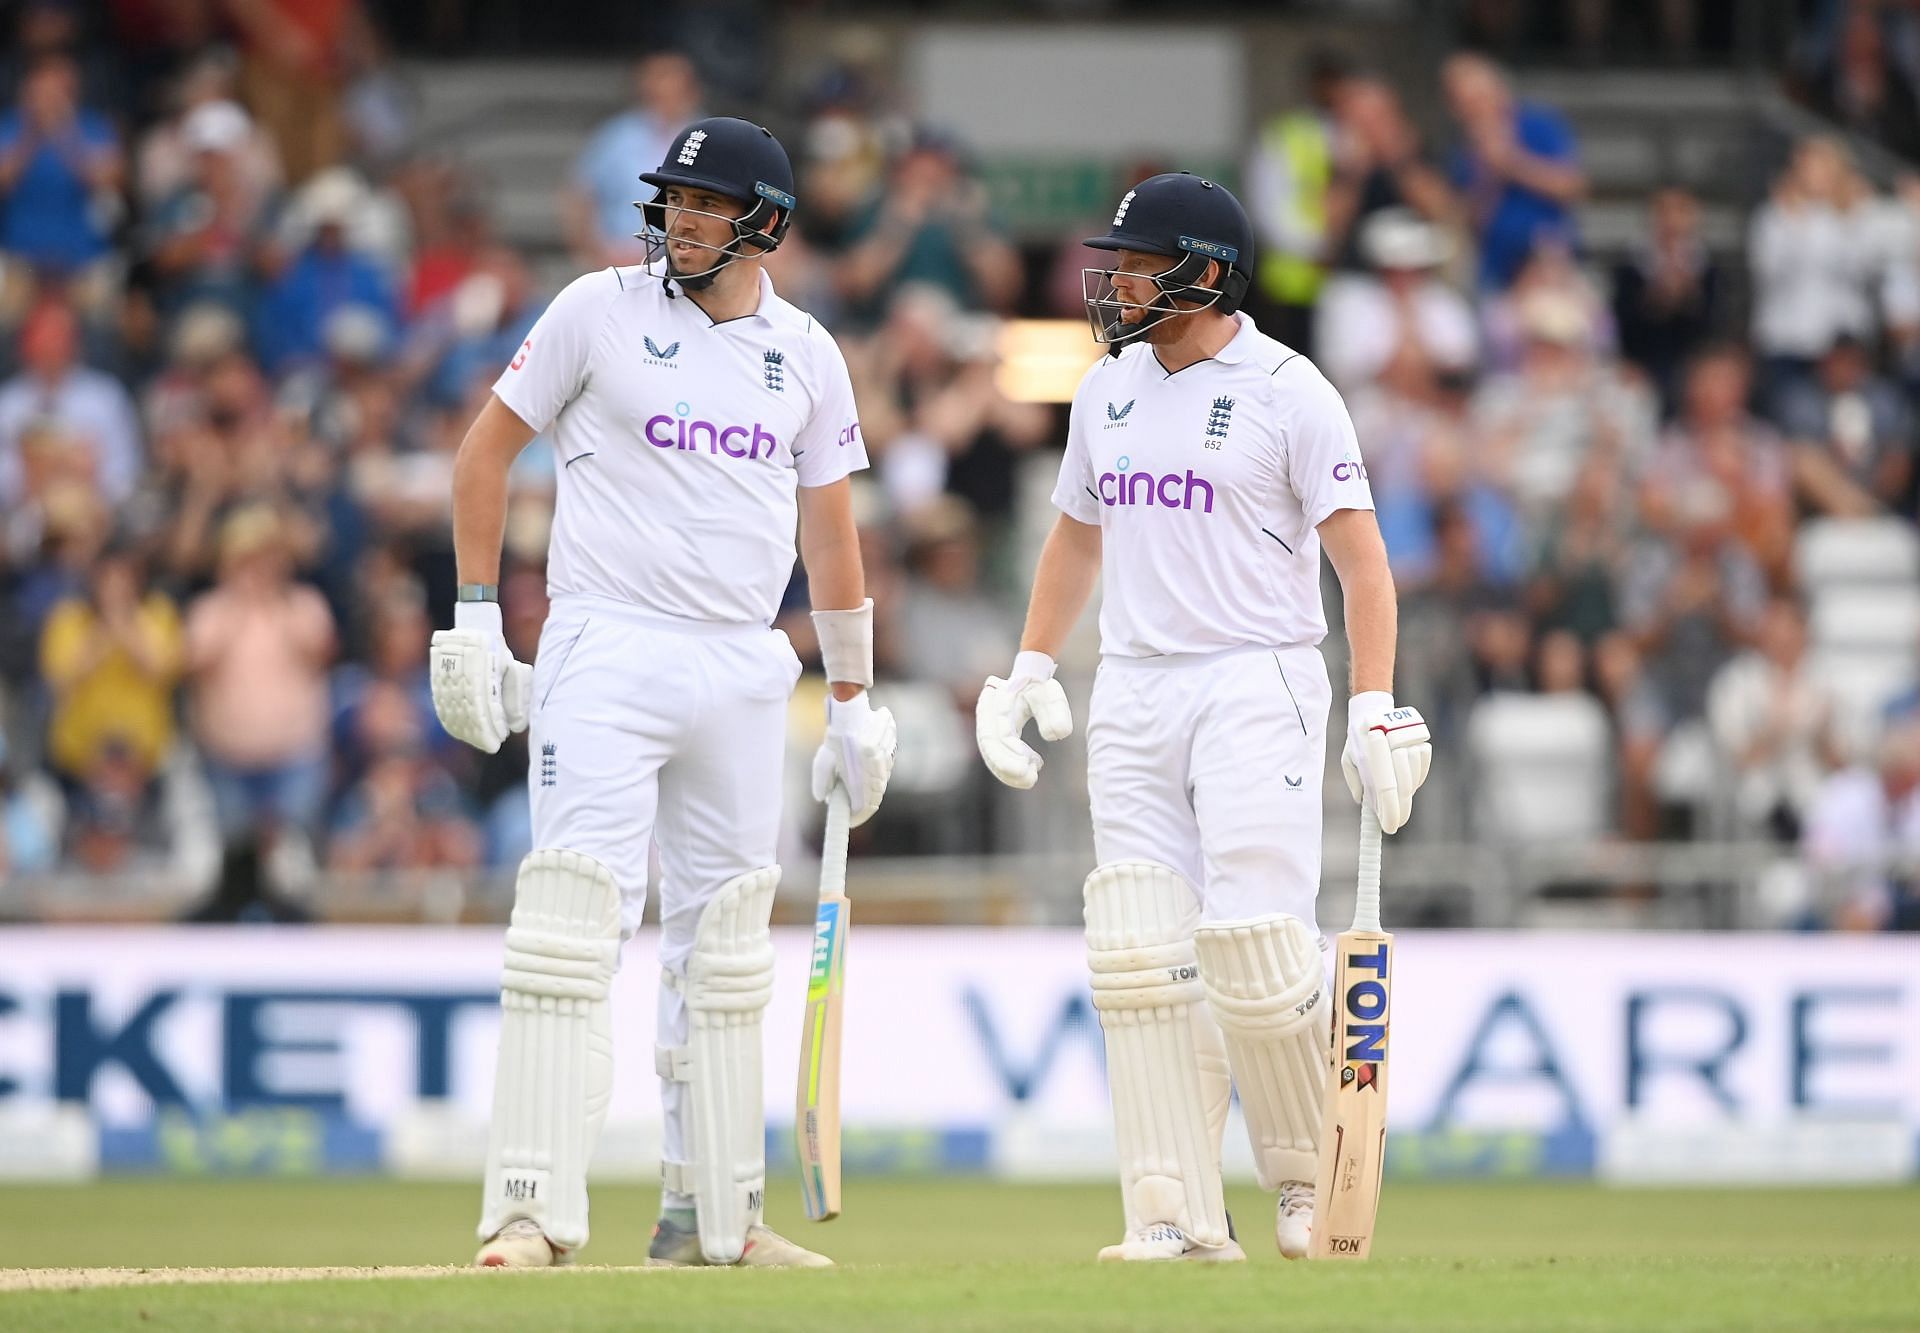 Jamie Overton and Jonny Bairstow batted magnificently. (Credits: Getty)